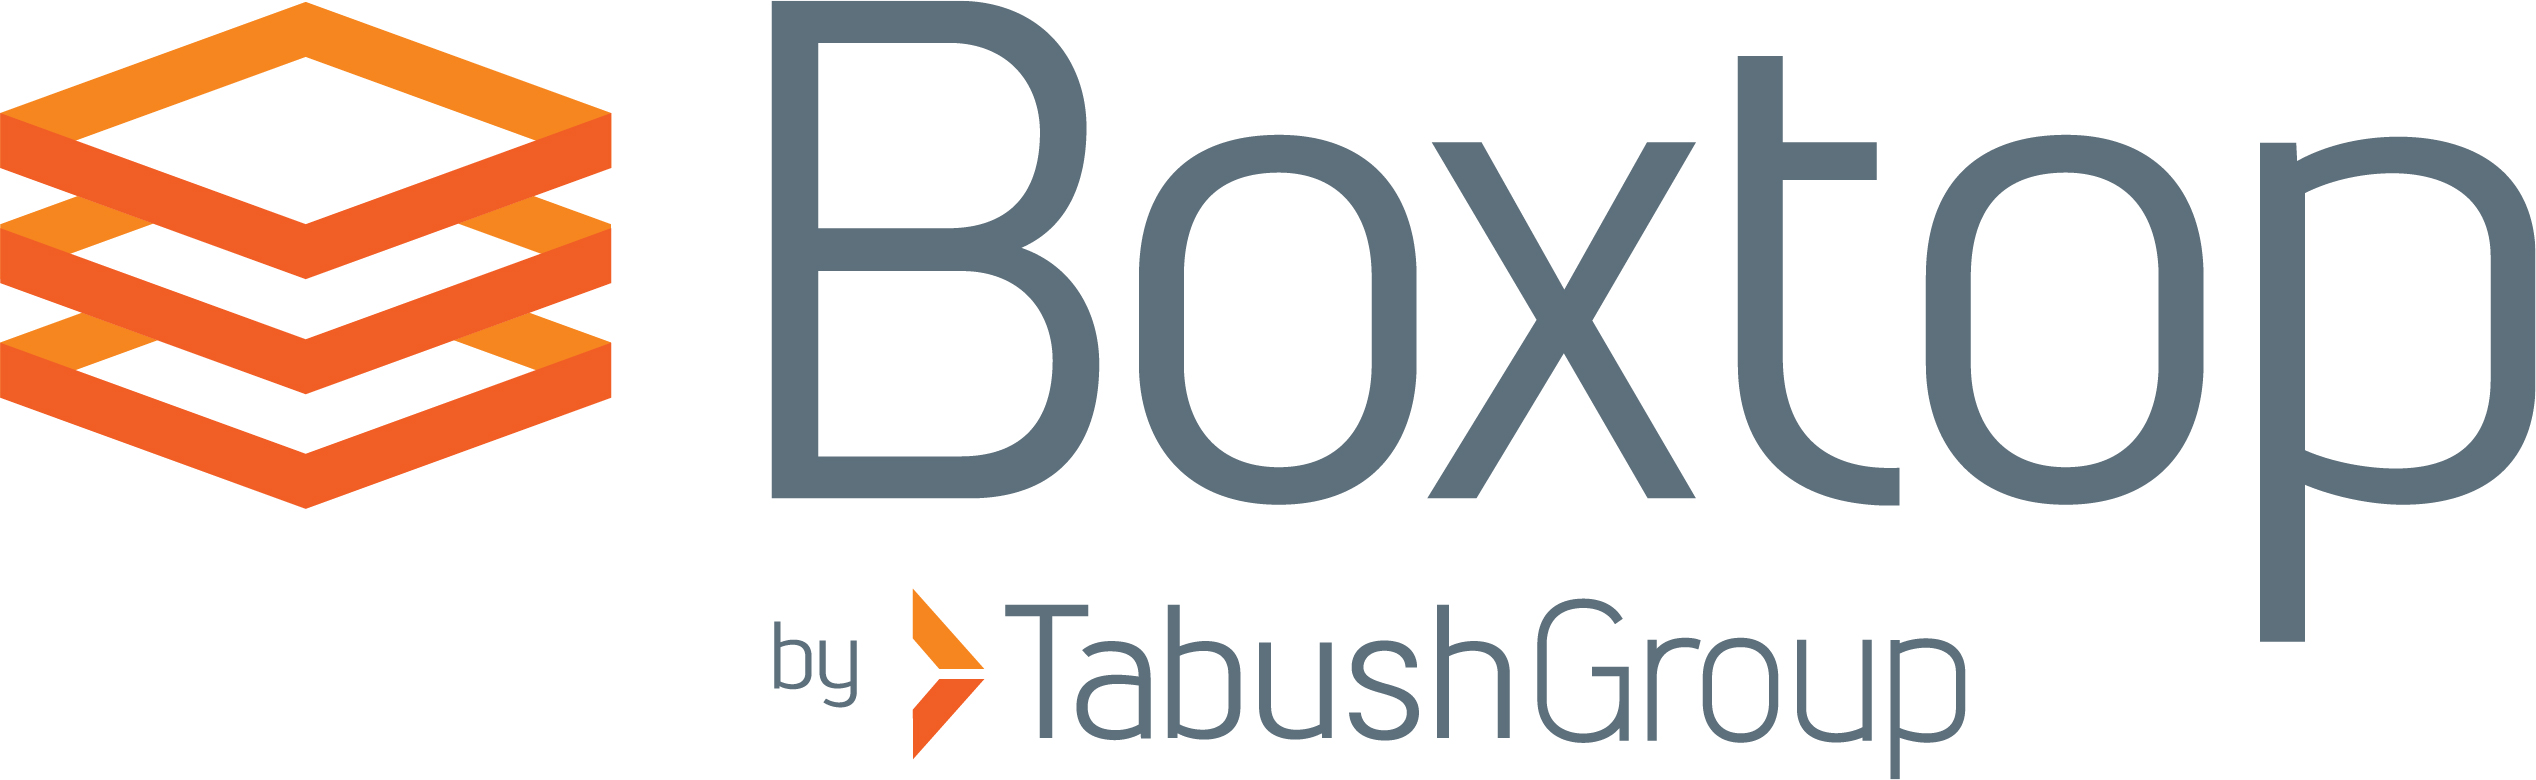 Boxtop Upgrading All Users for an Enhanced Cloud Experience